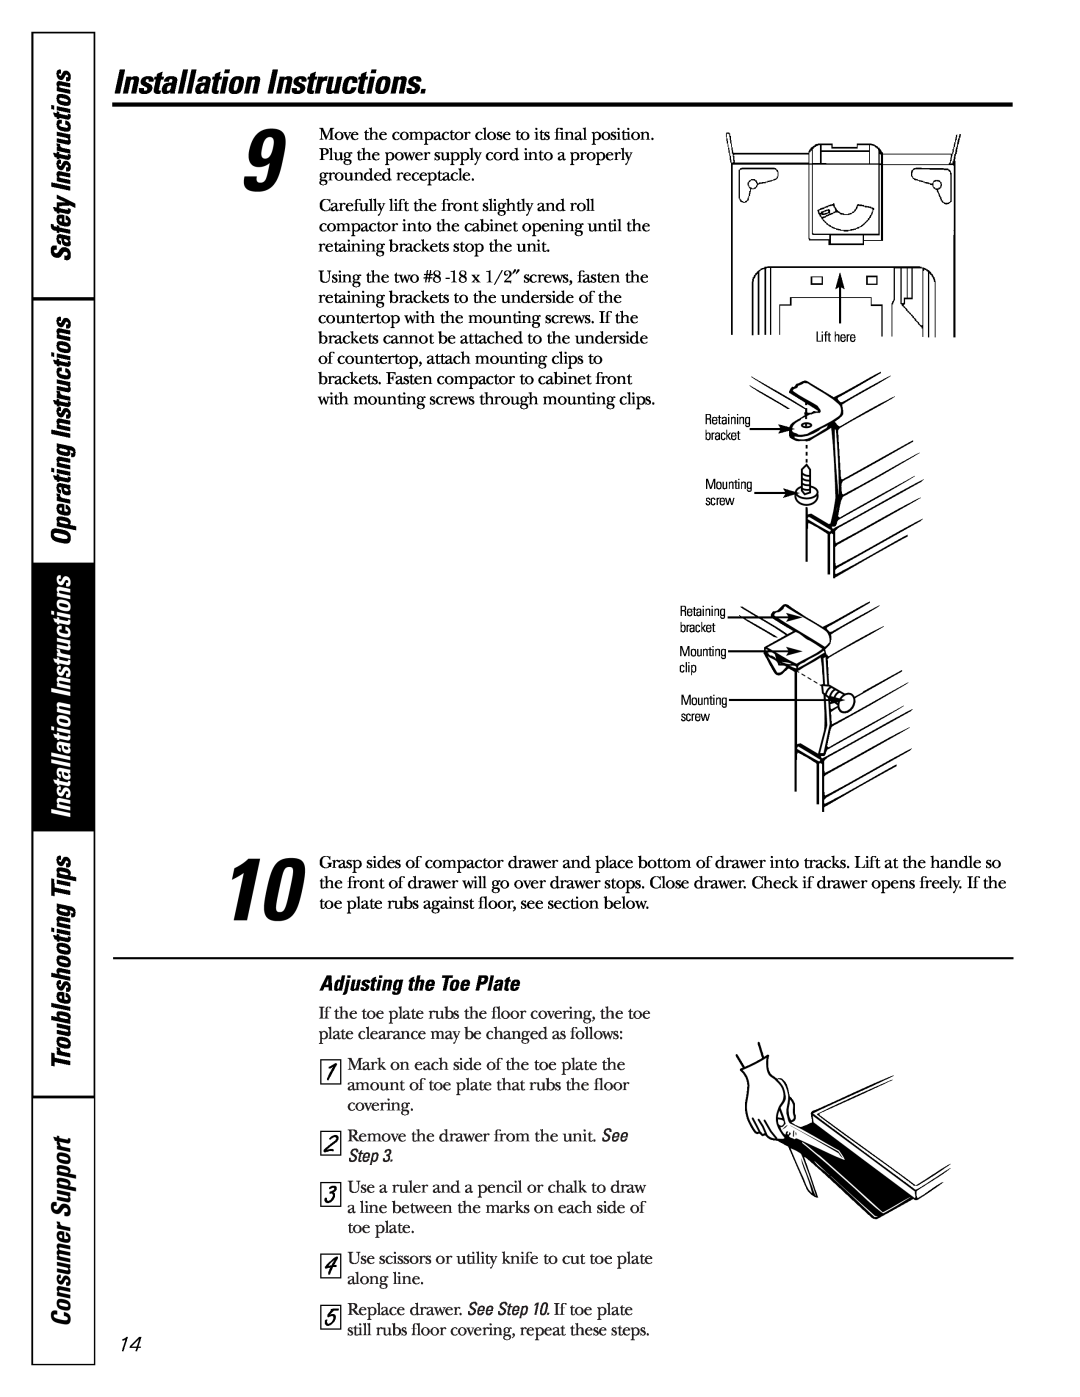 GE GCG1520 owner manual Adjusting the Toe Plate, Installation Instructions 